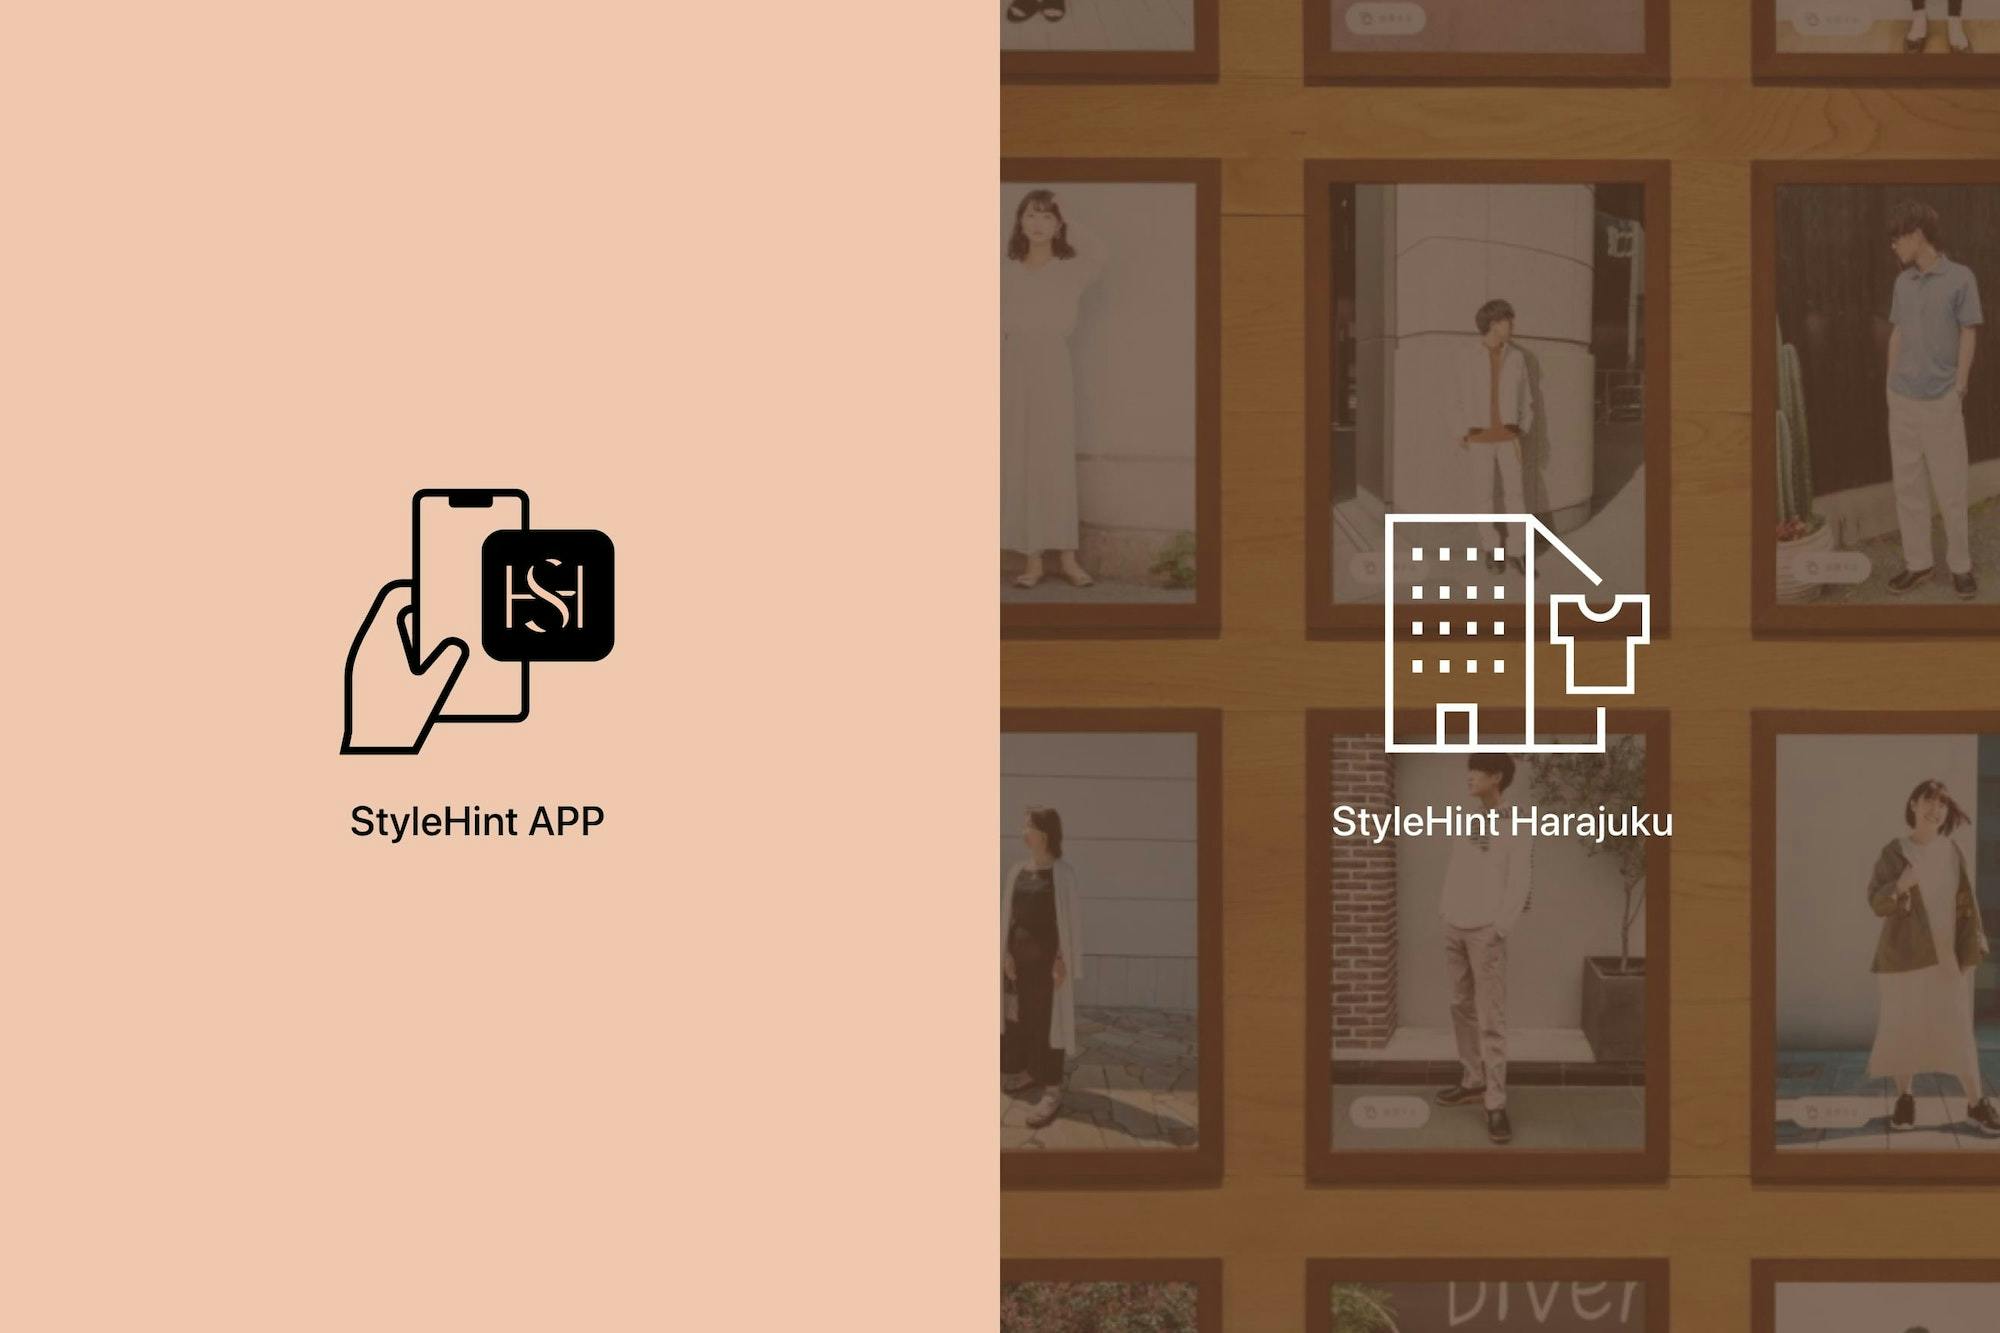 the StyleHint App icon and the StyleHint Harajuku store installation